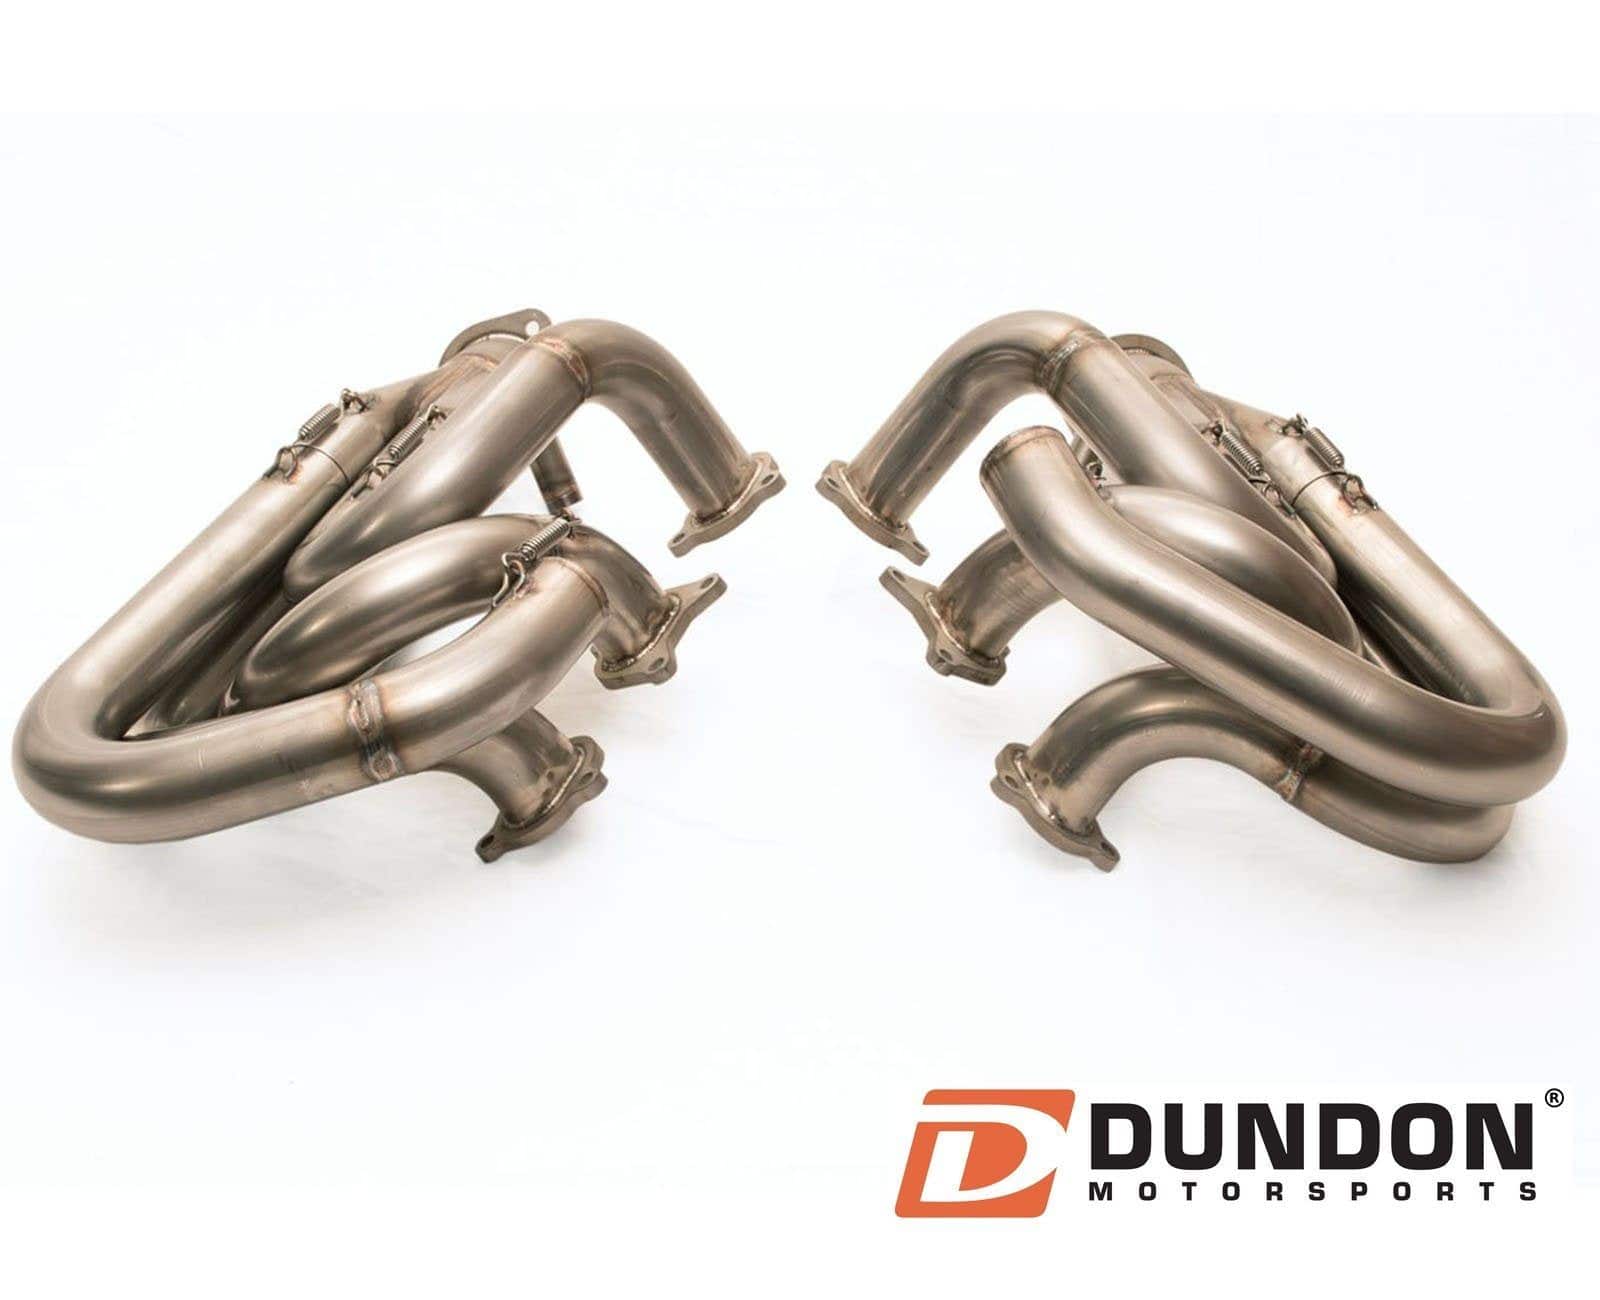 Engine - Exhaust - WTB - 981 3.4L Dundon Club Sport Race Headers - New or Used - -1 to 2024  All Models - Douglasville, GA 30135, United States